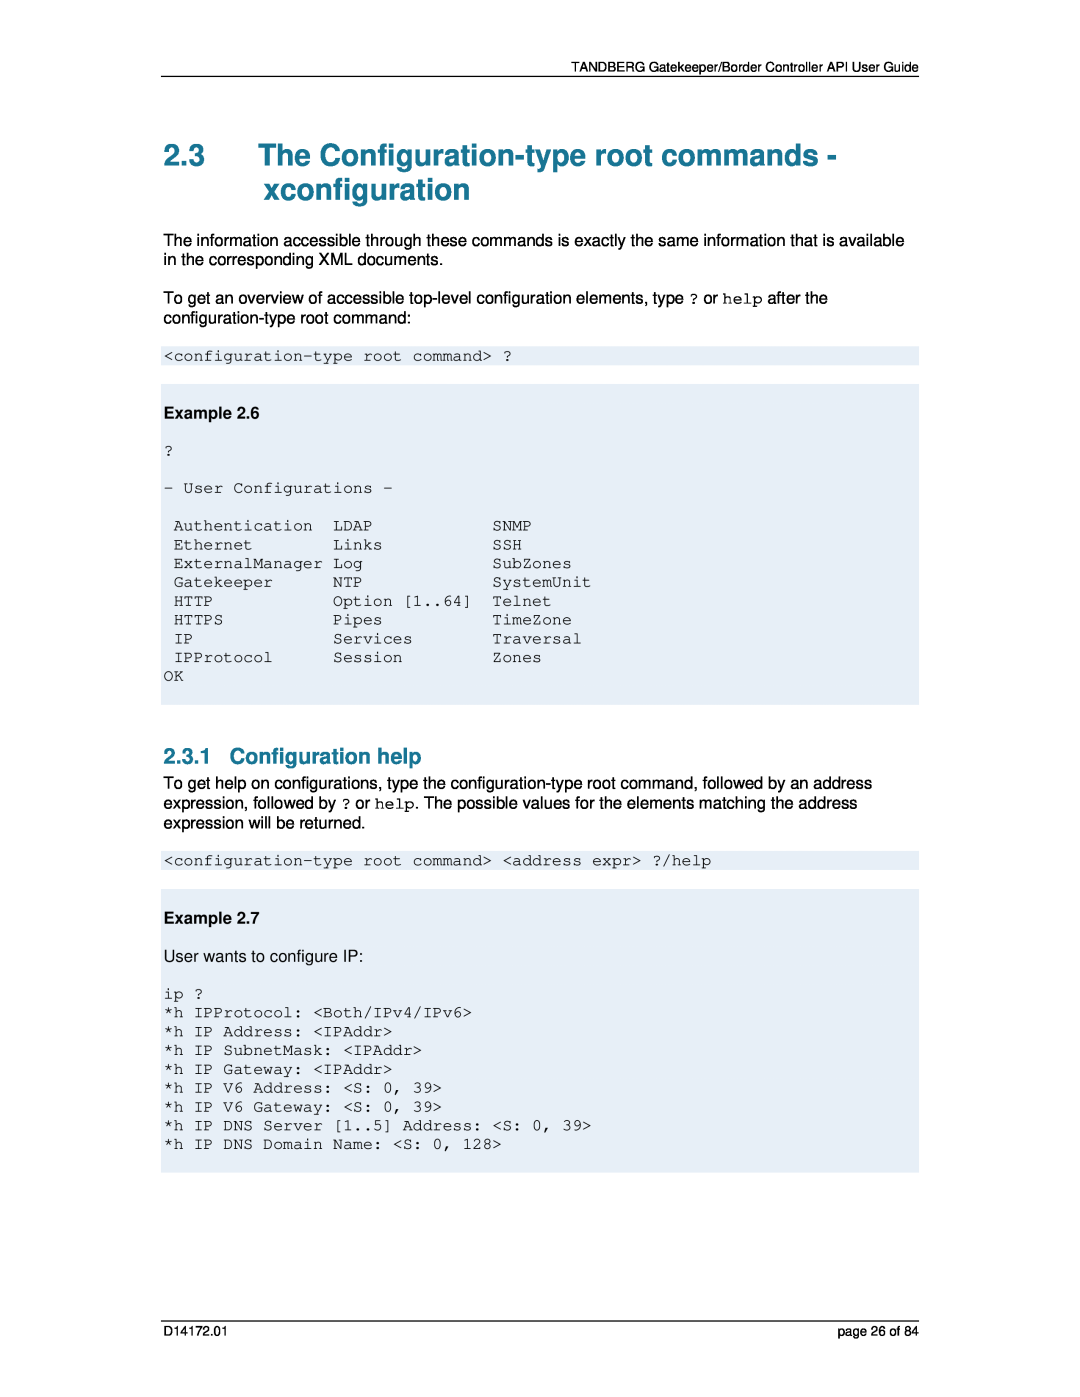 TANDBERG D14172.01 manual The Configuration-type root commands - xconfiguration, Configuration help, Example 